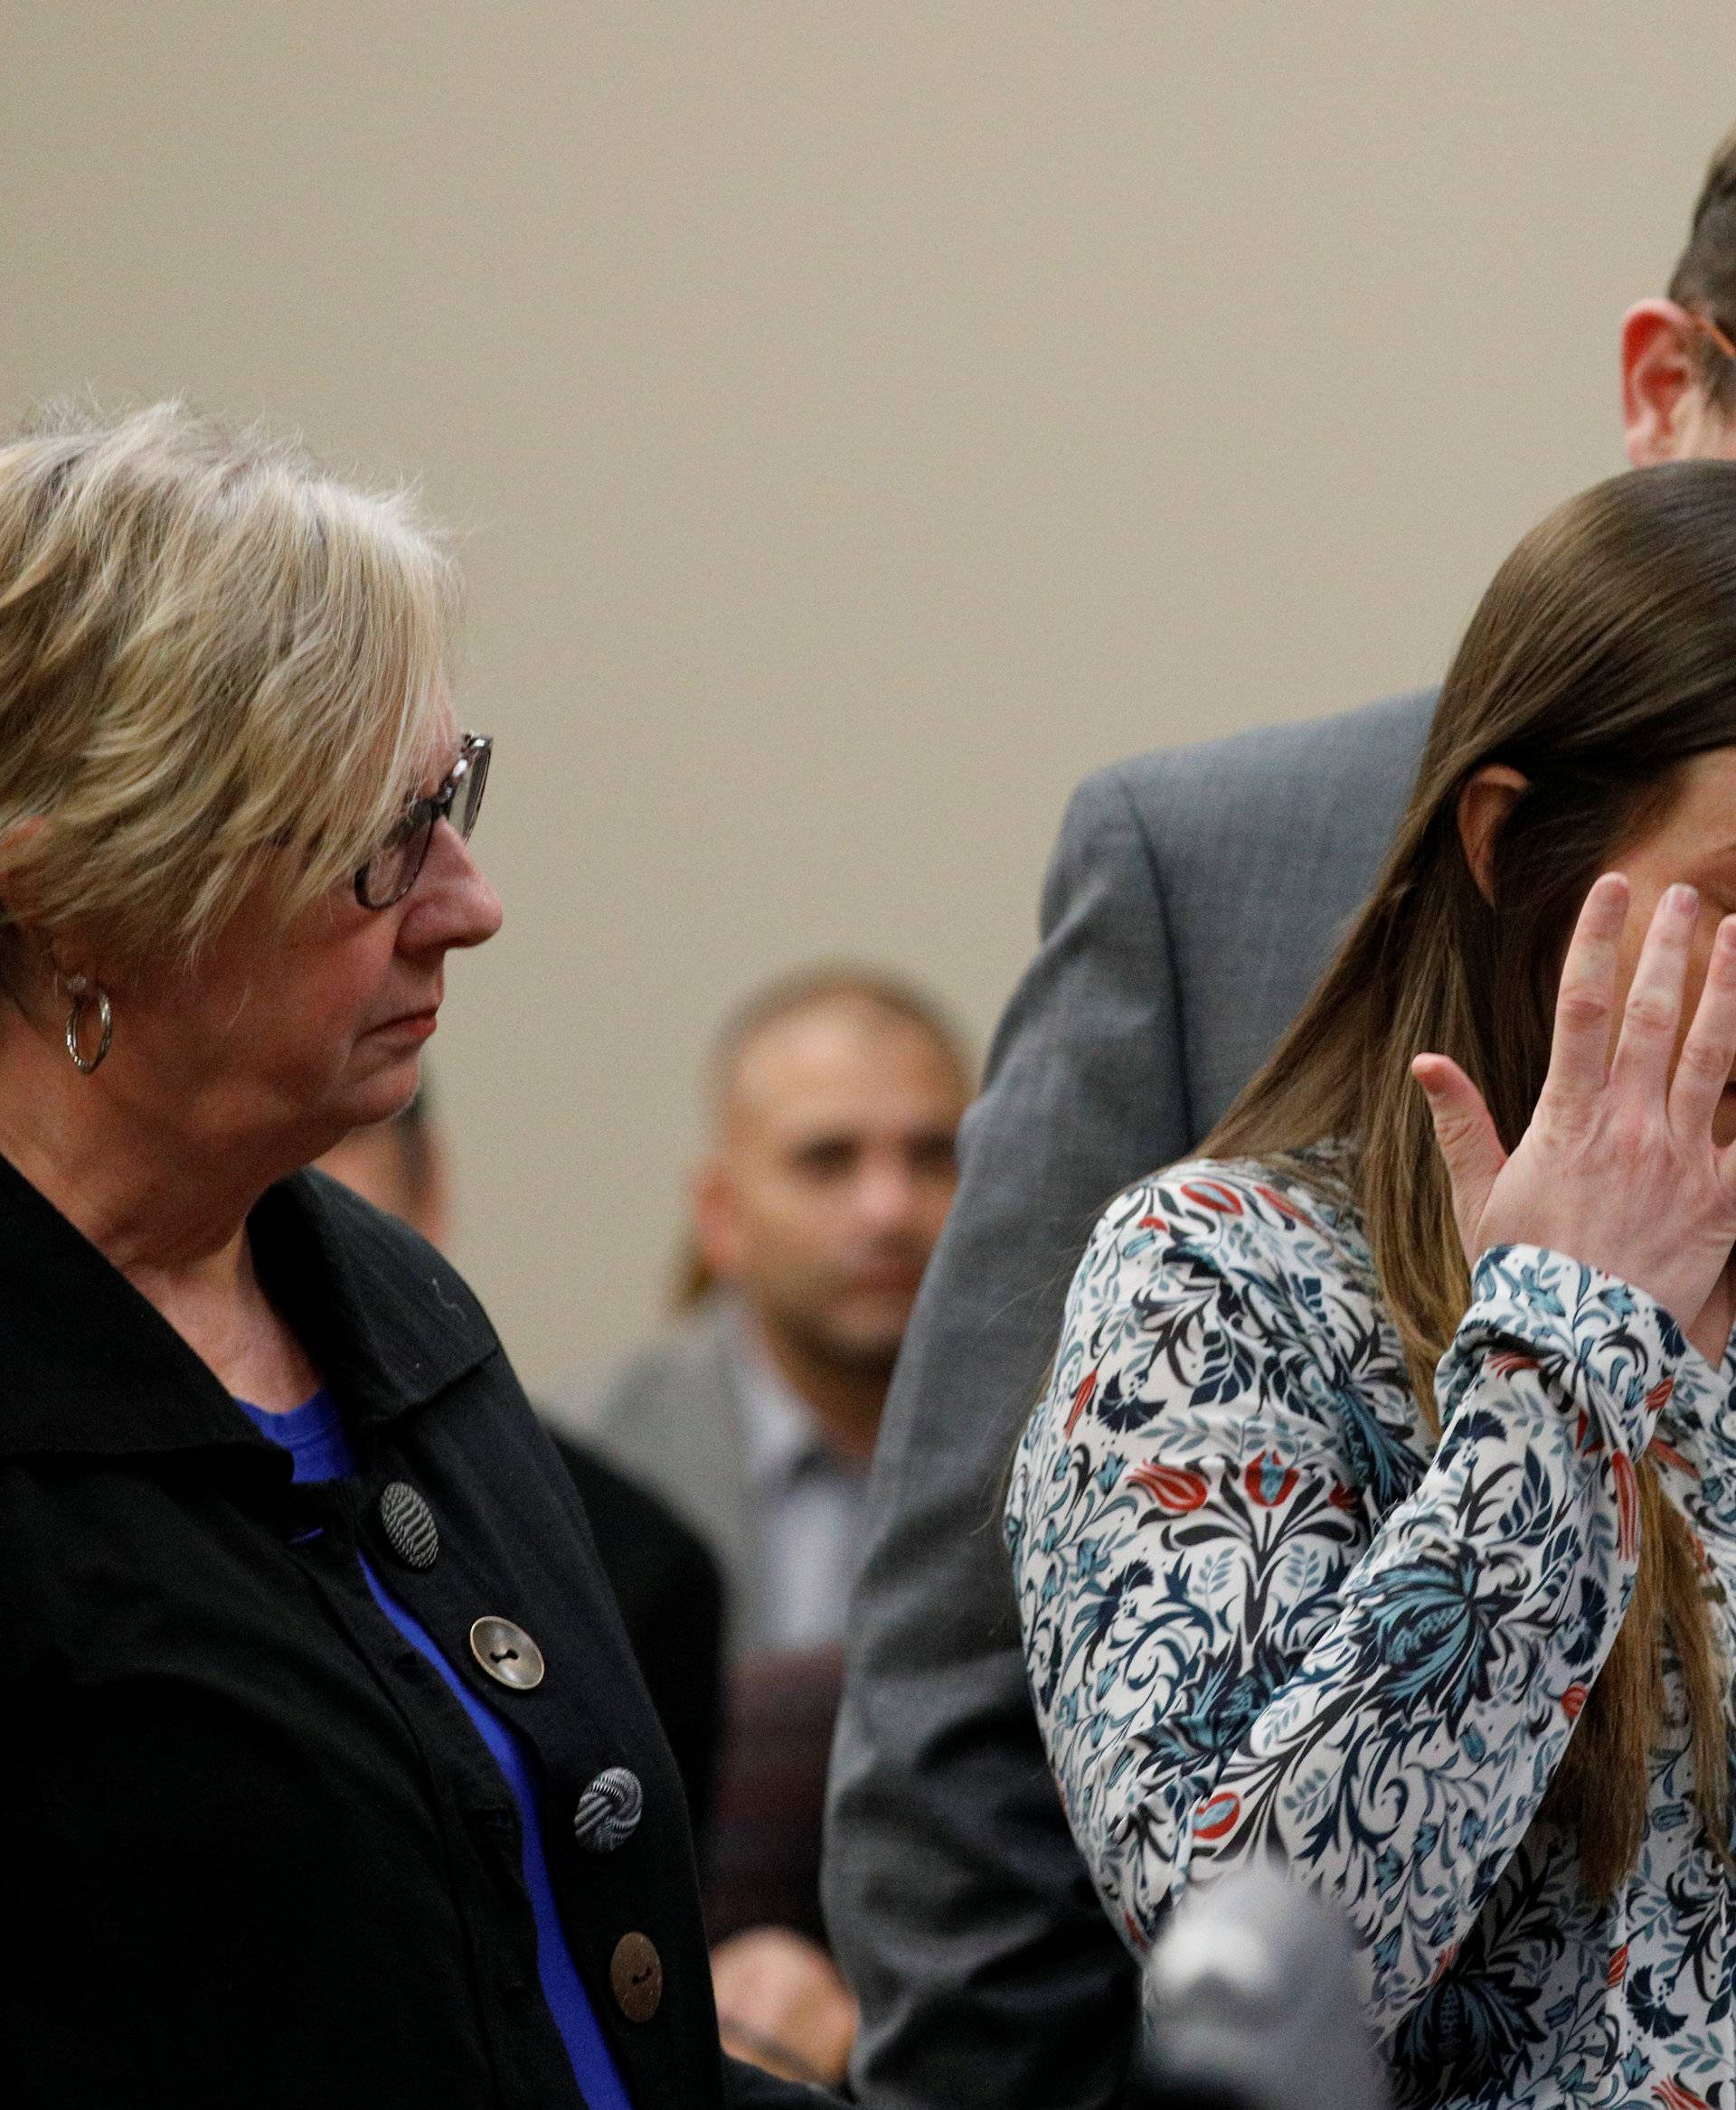 Victim Brianne Randall speaks at the sentencing hearing for Larry Nassar, a former team USA Gymnastics doctor who pleaded guilty in November 2017 to sexual assault charges, in Lansing